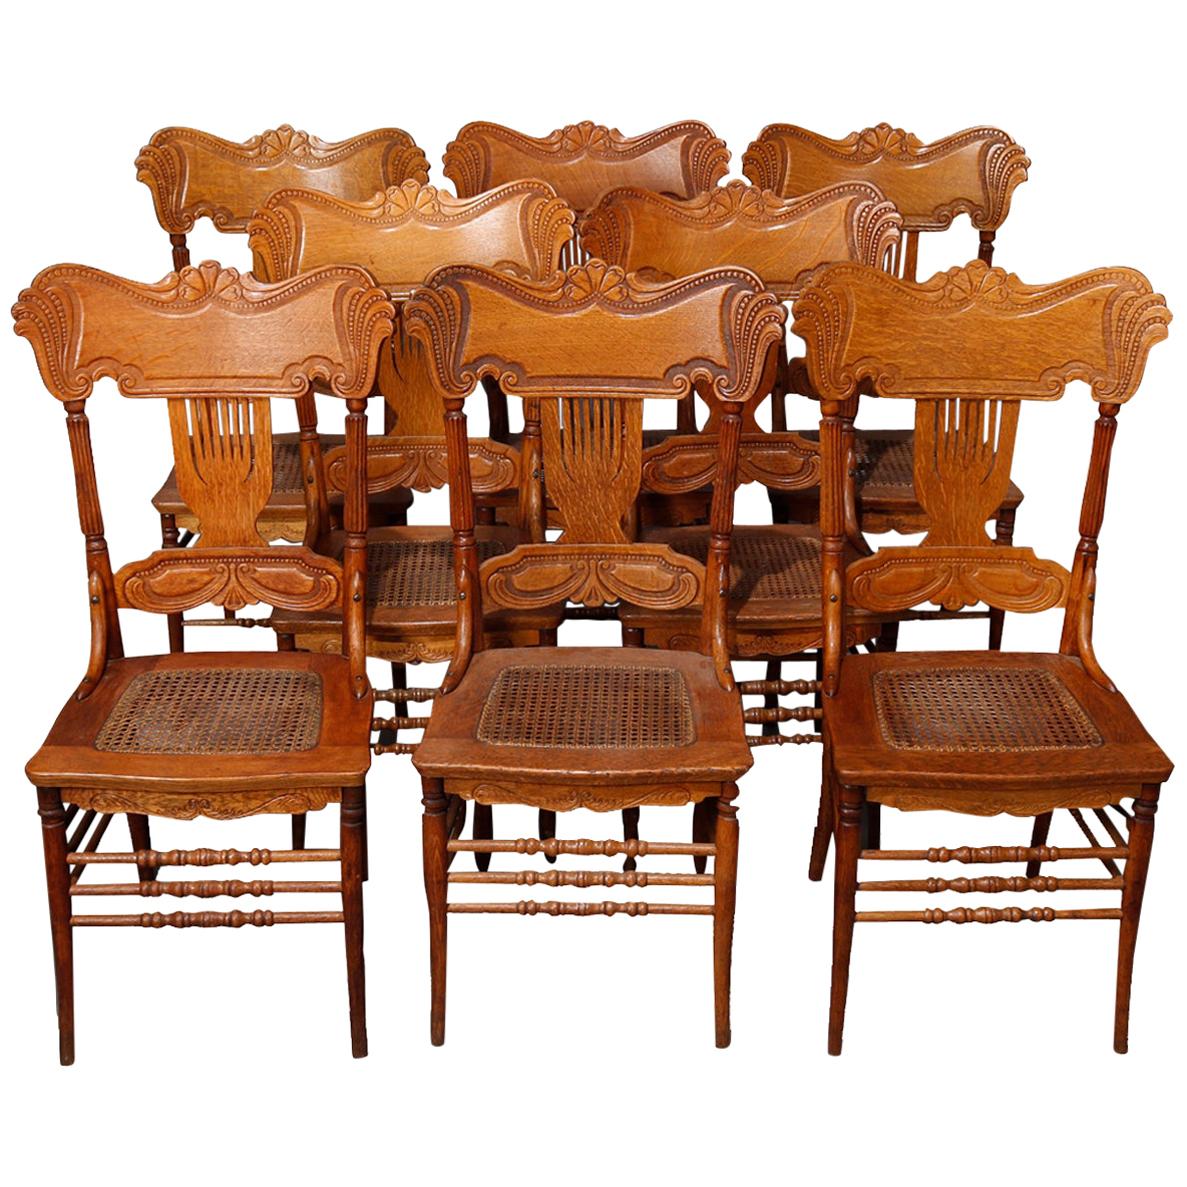 Eight Antique Oak Pressed Back & Cane Seat Heywood Wakefield Dining Chairs 20thC